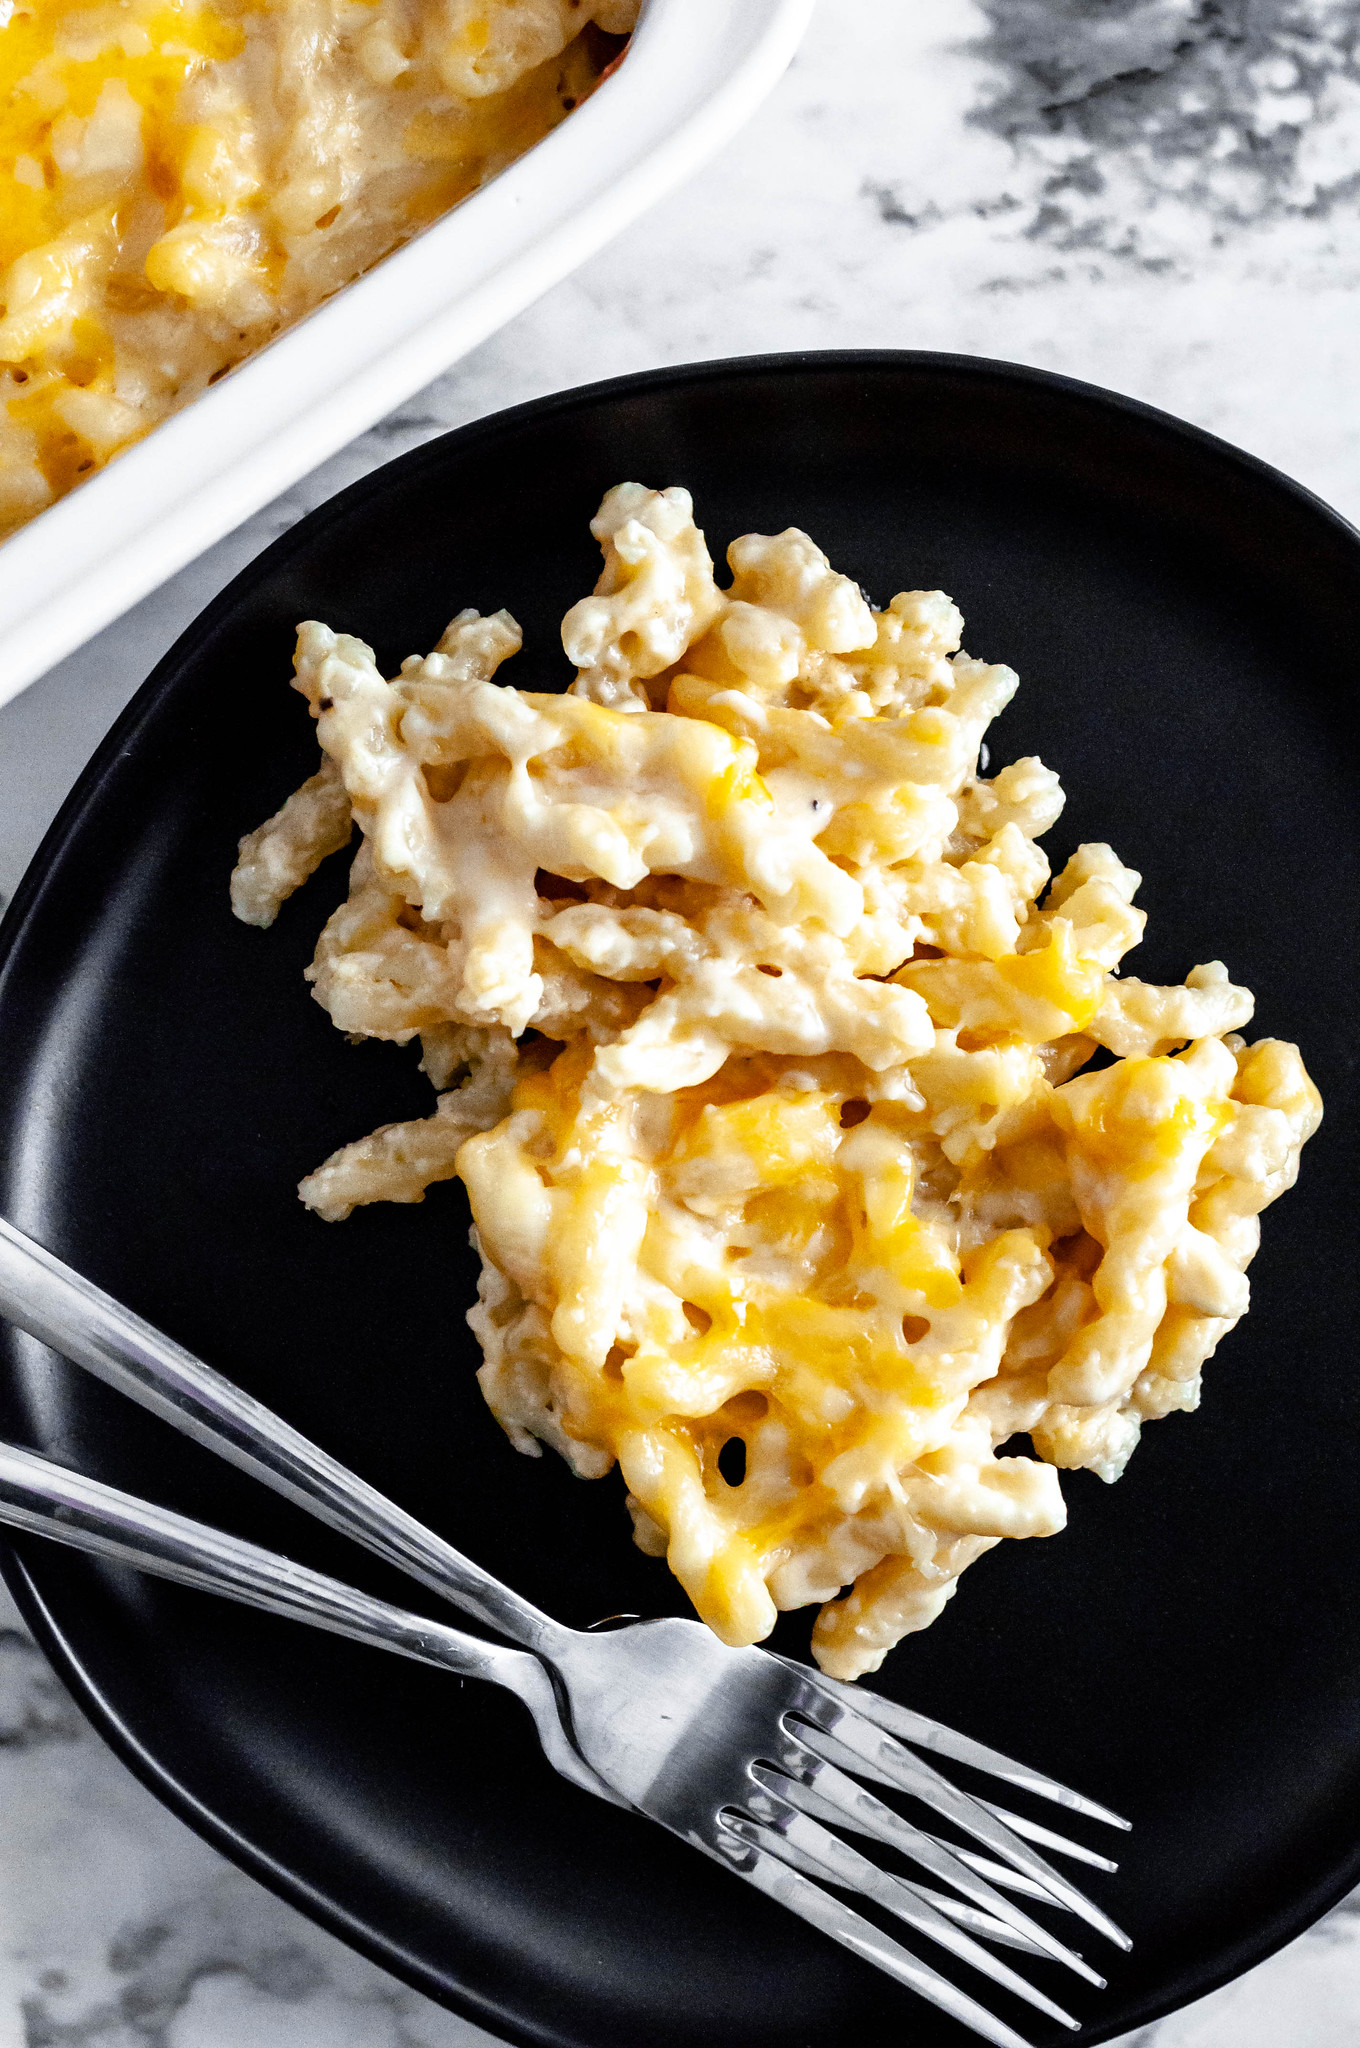 This creamy Smoked Gouda and Sharp Cheddar Macaroni and Cheese is the ultimate pasta dish. Just what your holiday table needs.